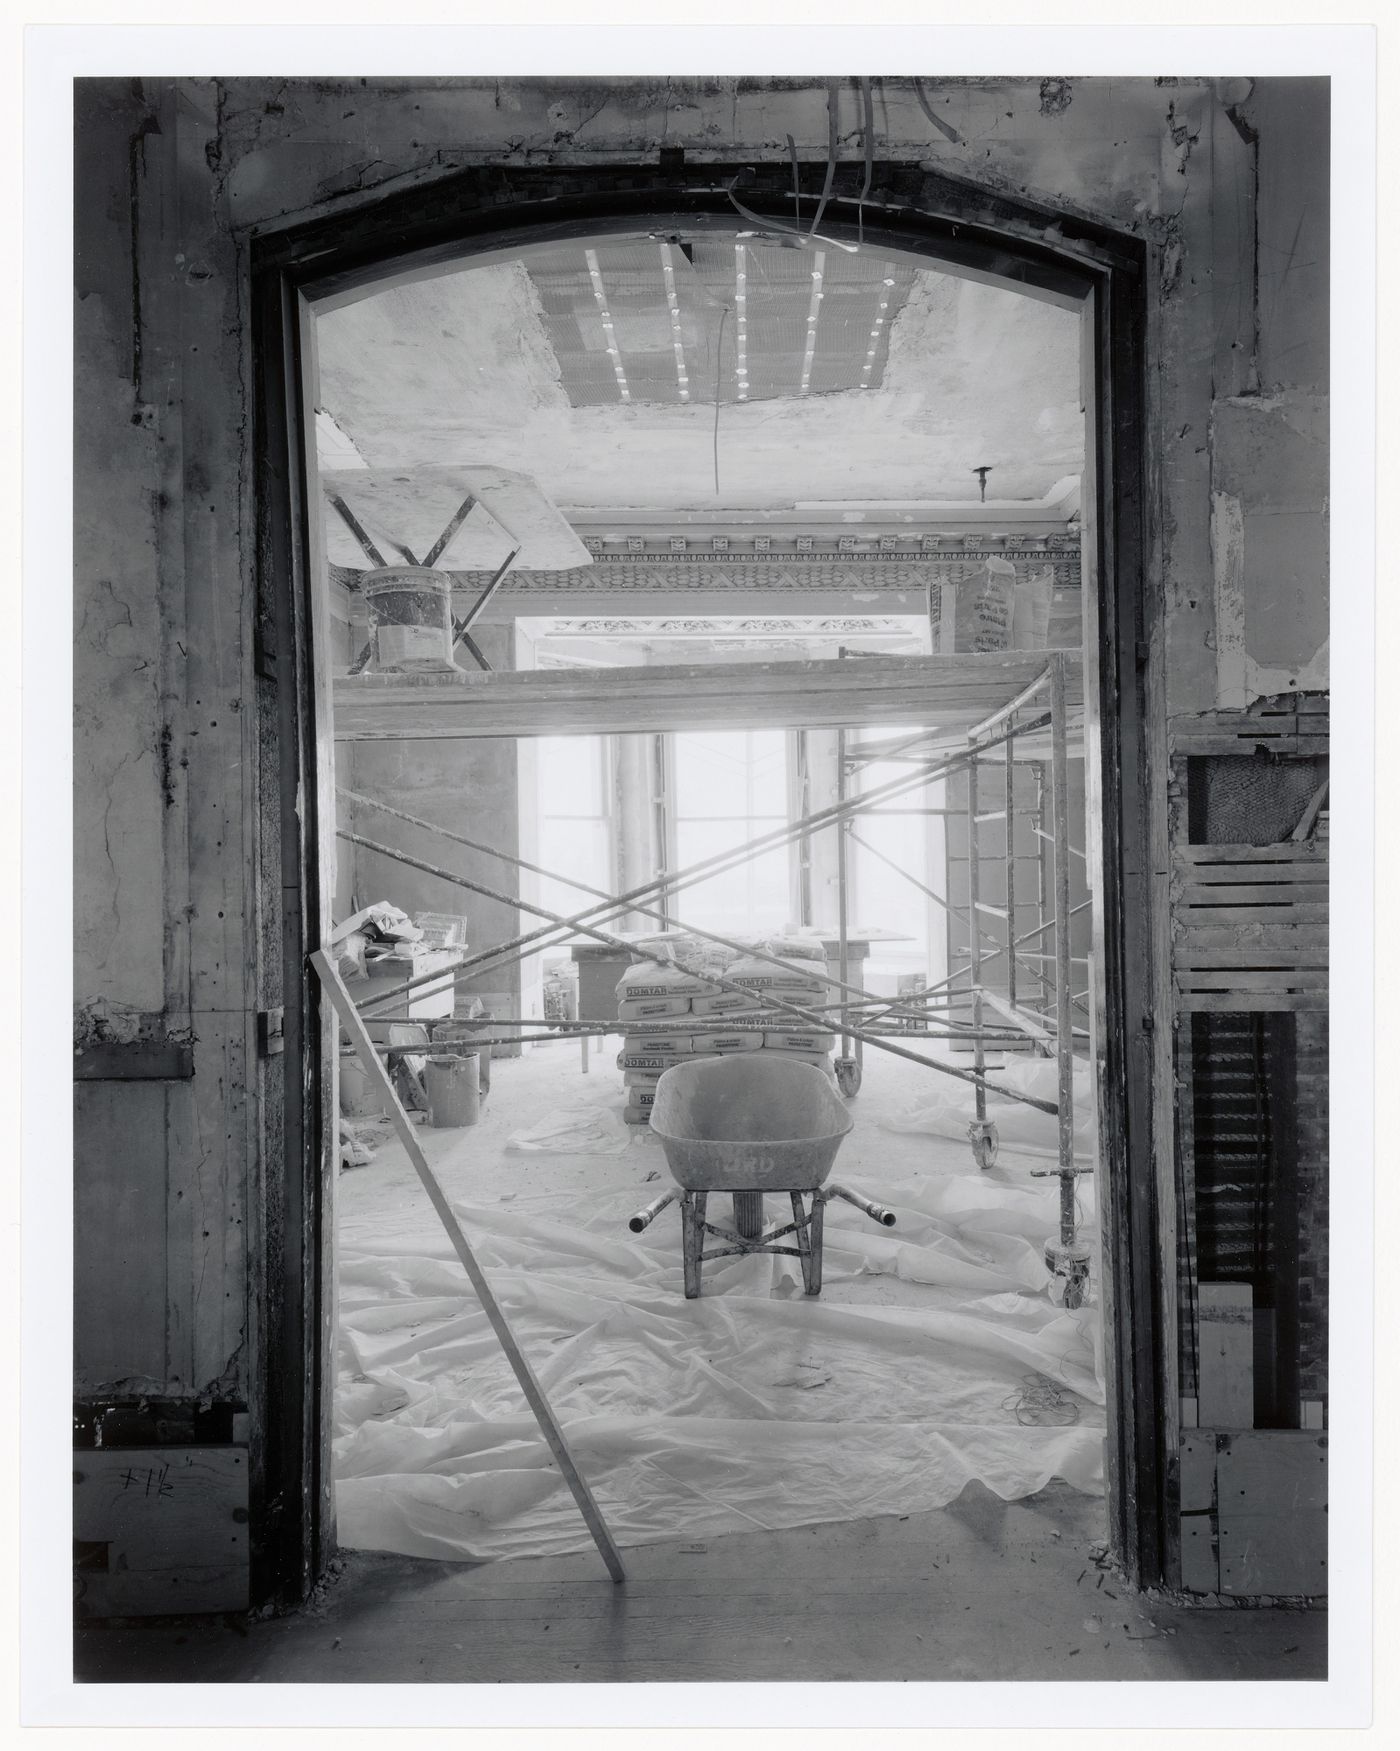 Interior view of the reception rooms showing scaffolds and a wheelbarrow in the foreground and a bay window in the background, Shaughnessy House under renovation, Montréal, Québec